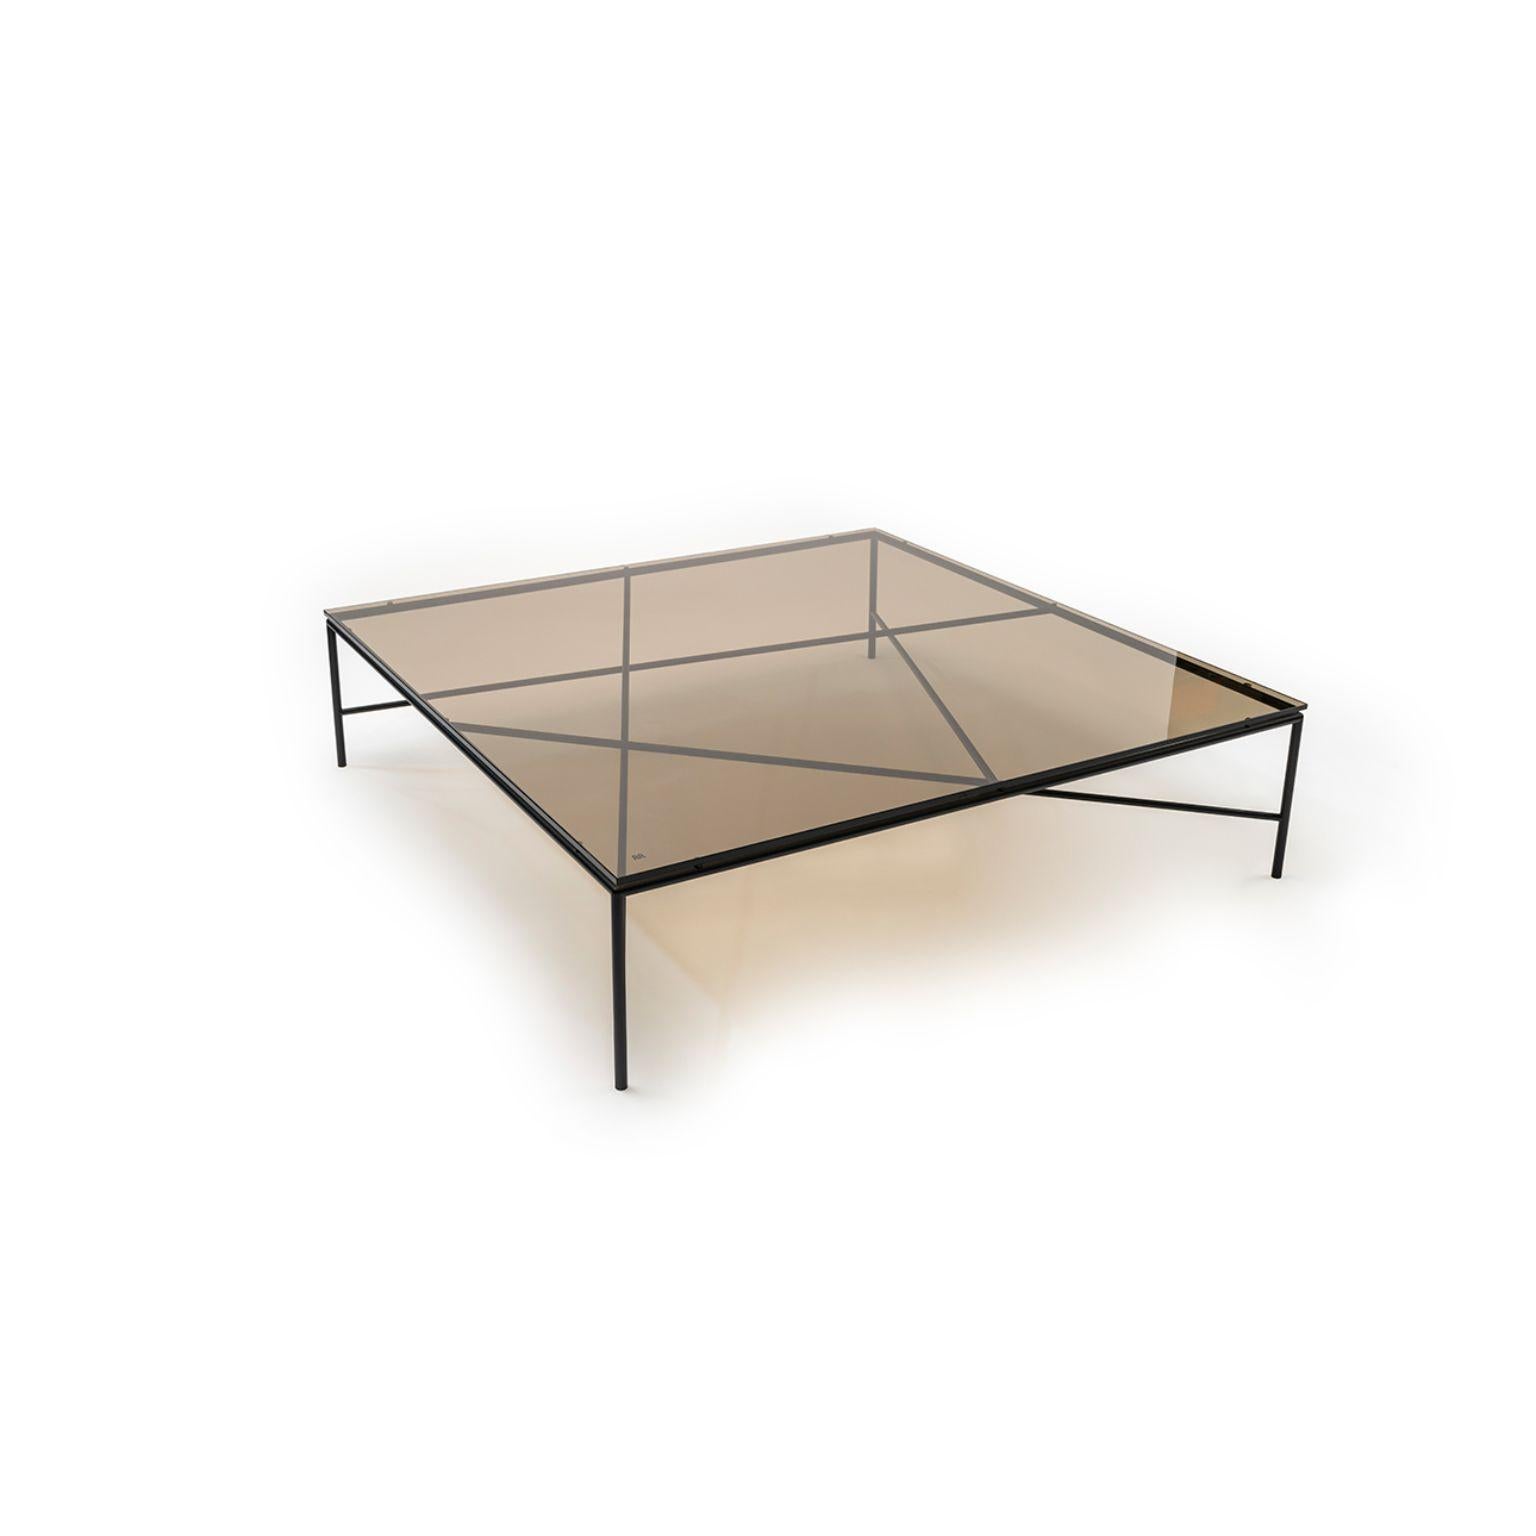 Static table by Todd Bracher
Materials: Top: Glass
 Structure: Black and Peltro powder-coated metal.
Dimensions: : Ø 120 x H 30.7cm

Static is an iconic table. Its beauty is inherently tied to its structure, which was designed as a piece
of